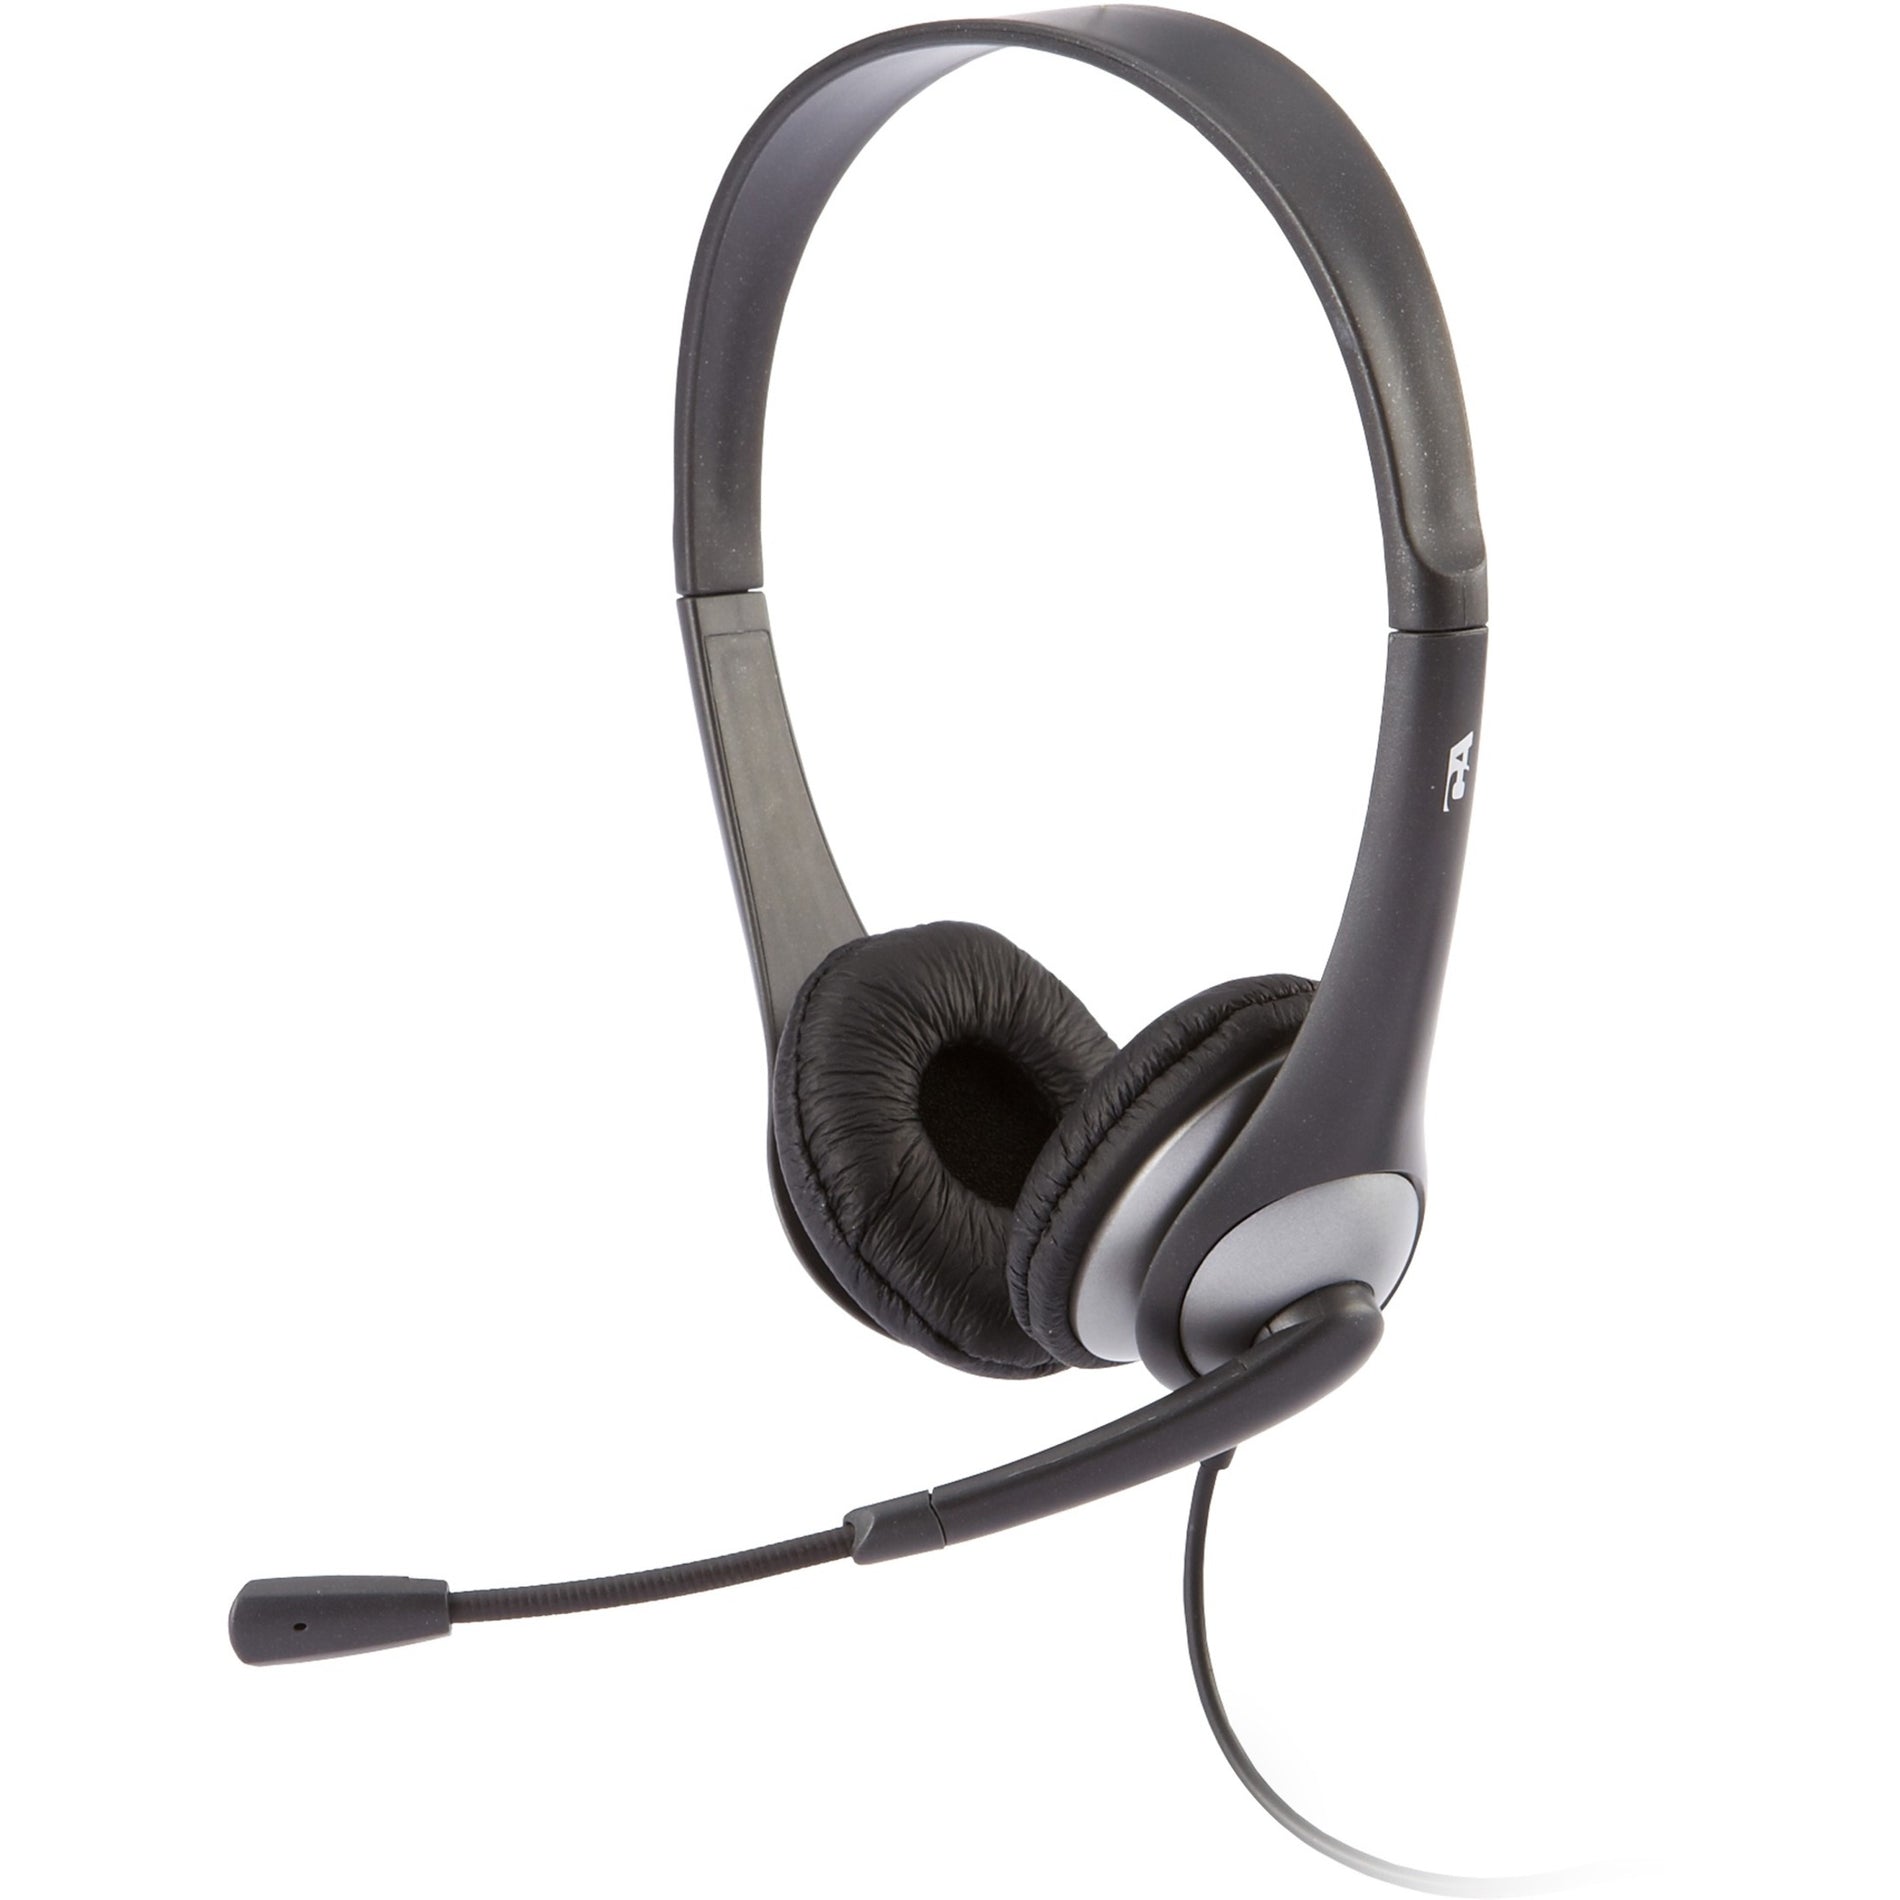 Cyber Acoustics AC-204 Headset, Over-the-head Binaural Wired Headset with Boom Microphone, Noise Cancelling, Adjustable Headband